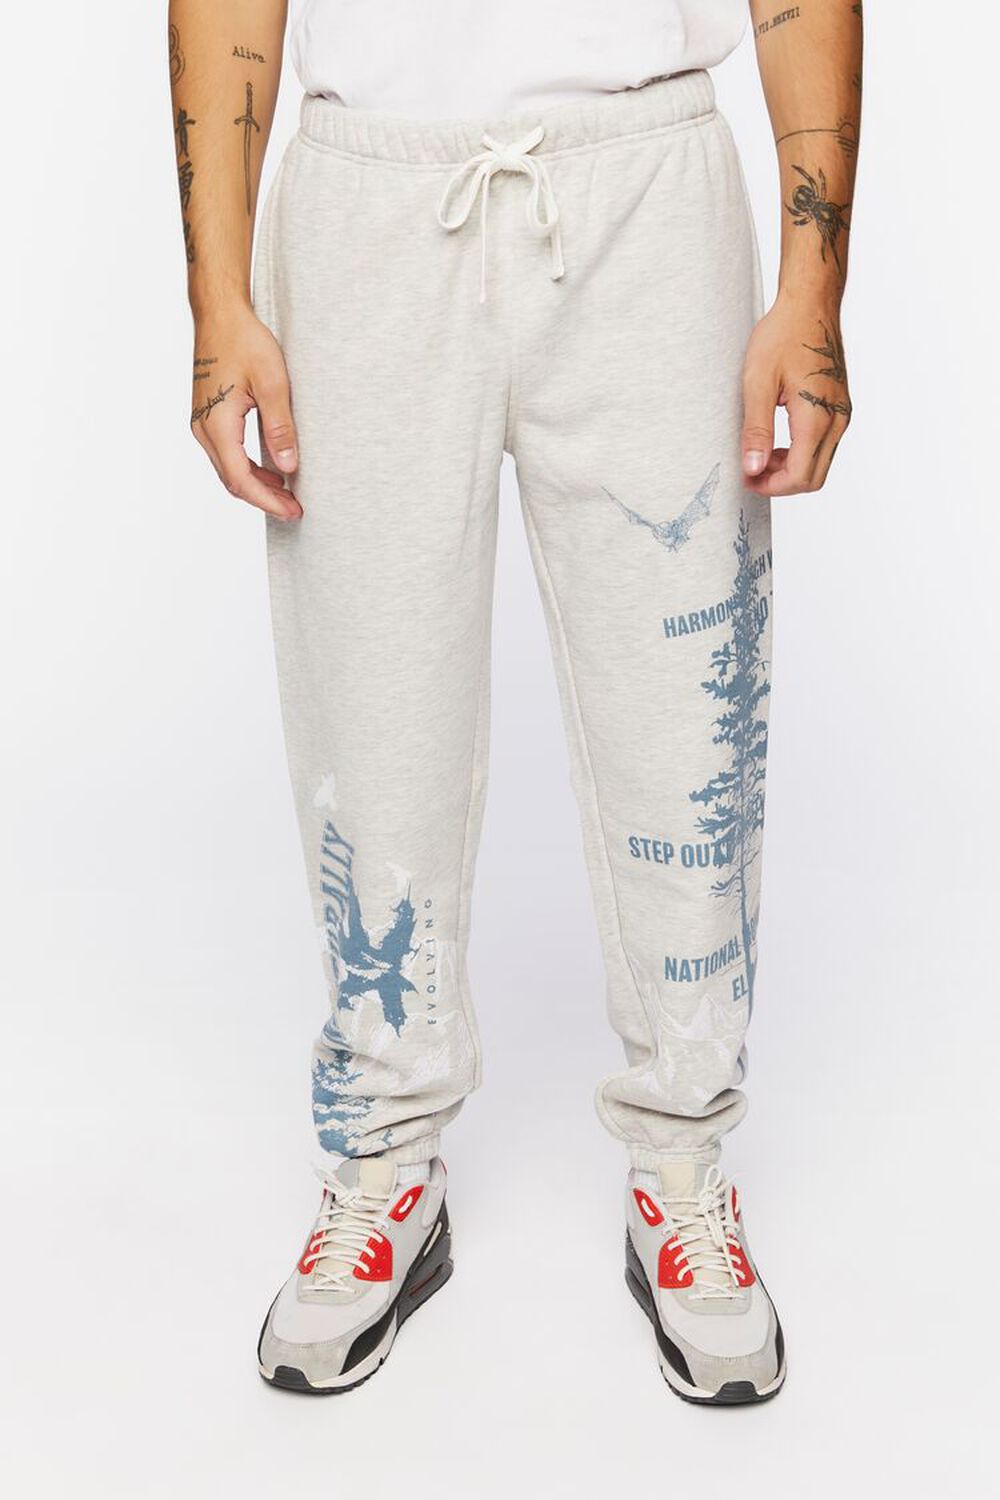 HEATHER GREY/BLUE Nature Graphic Joggers, image 2